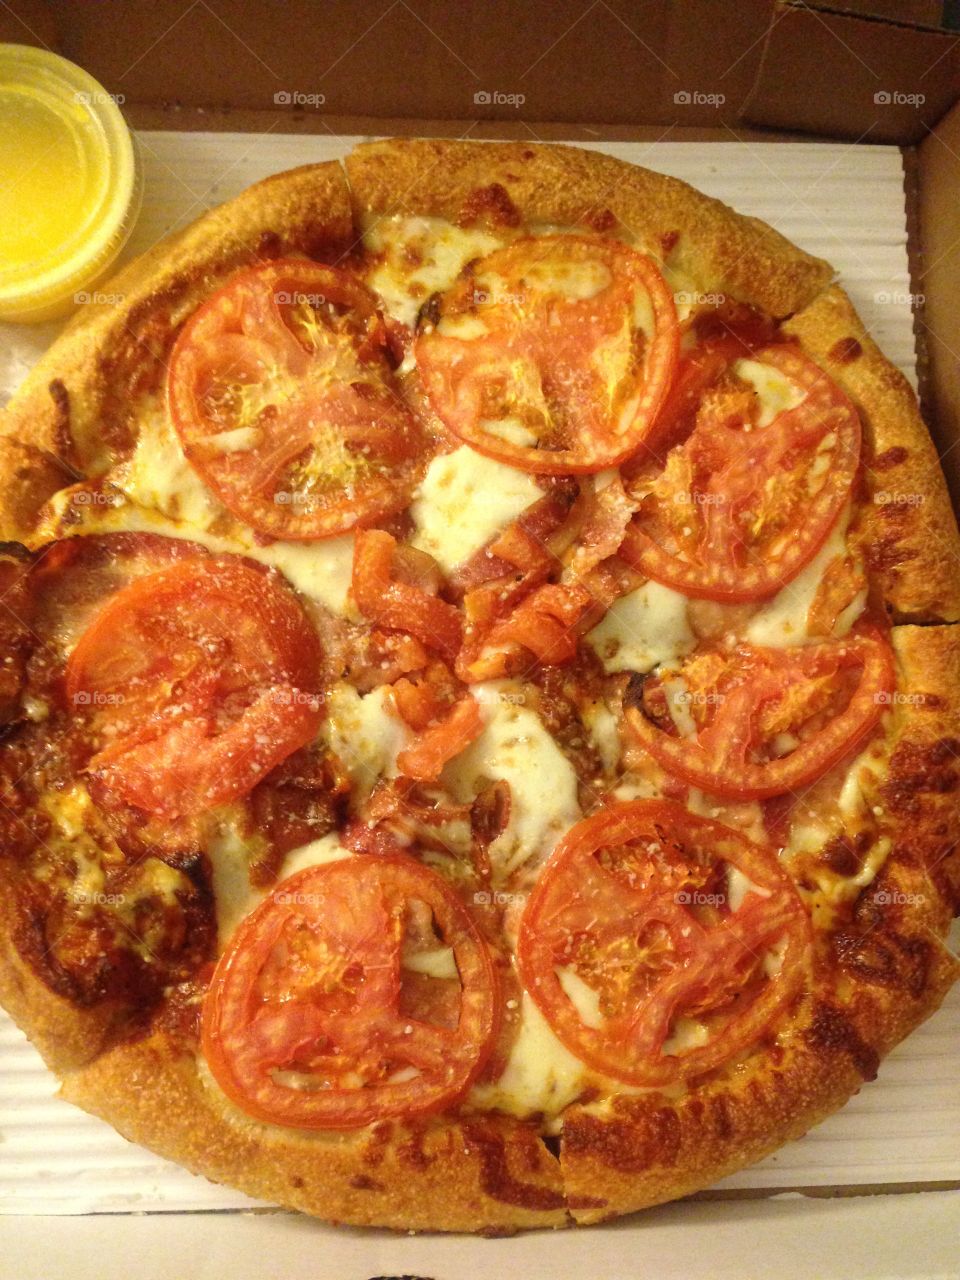 Tomato Bacon Pizza from A Slice Above Pizza in Strongsville, Ohio